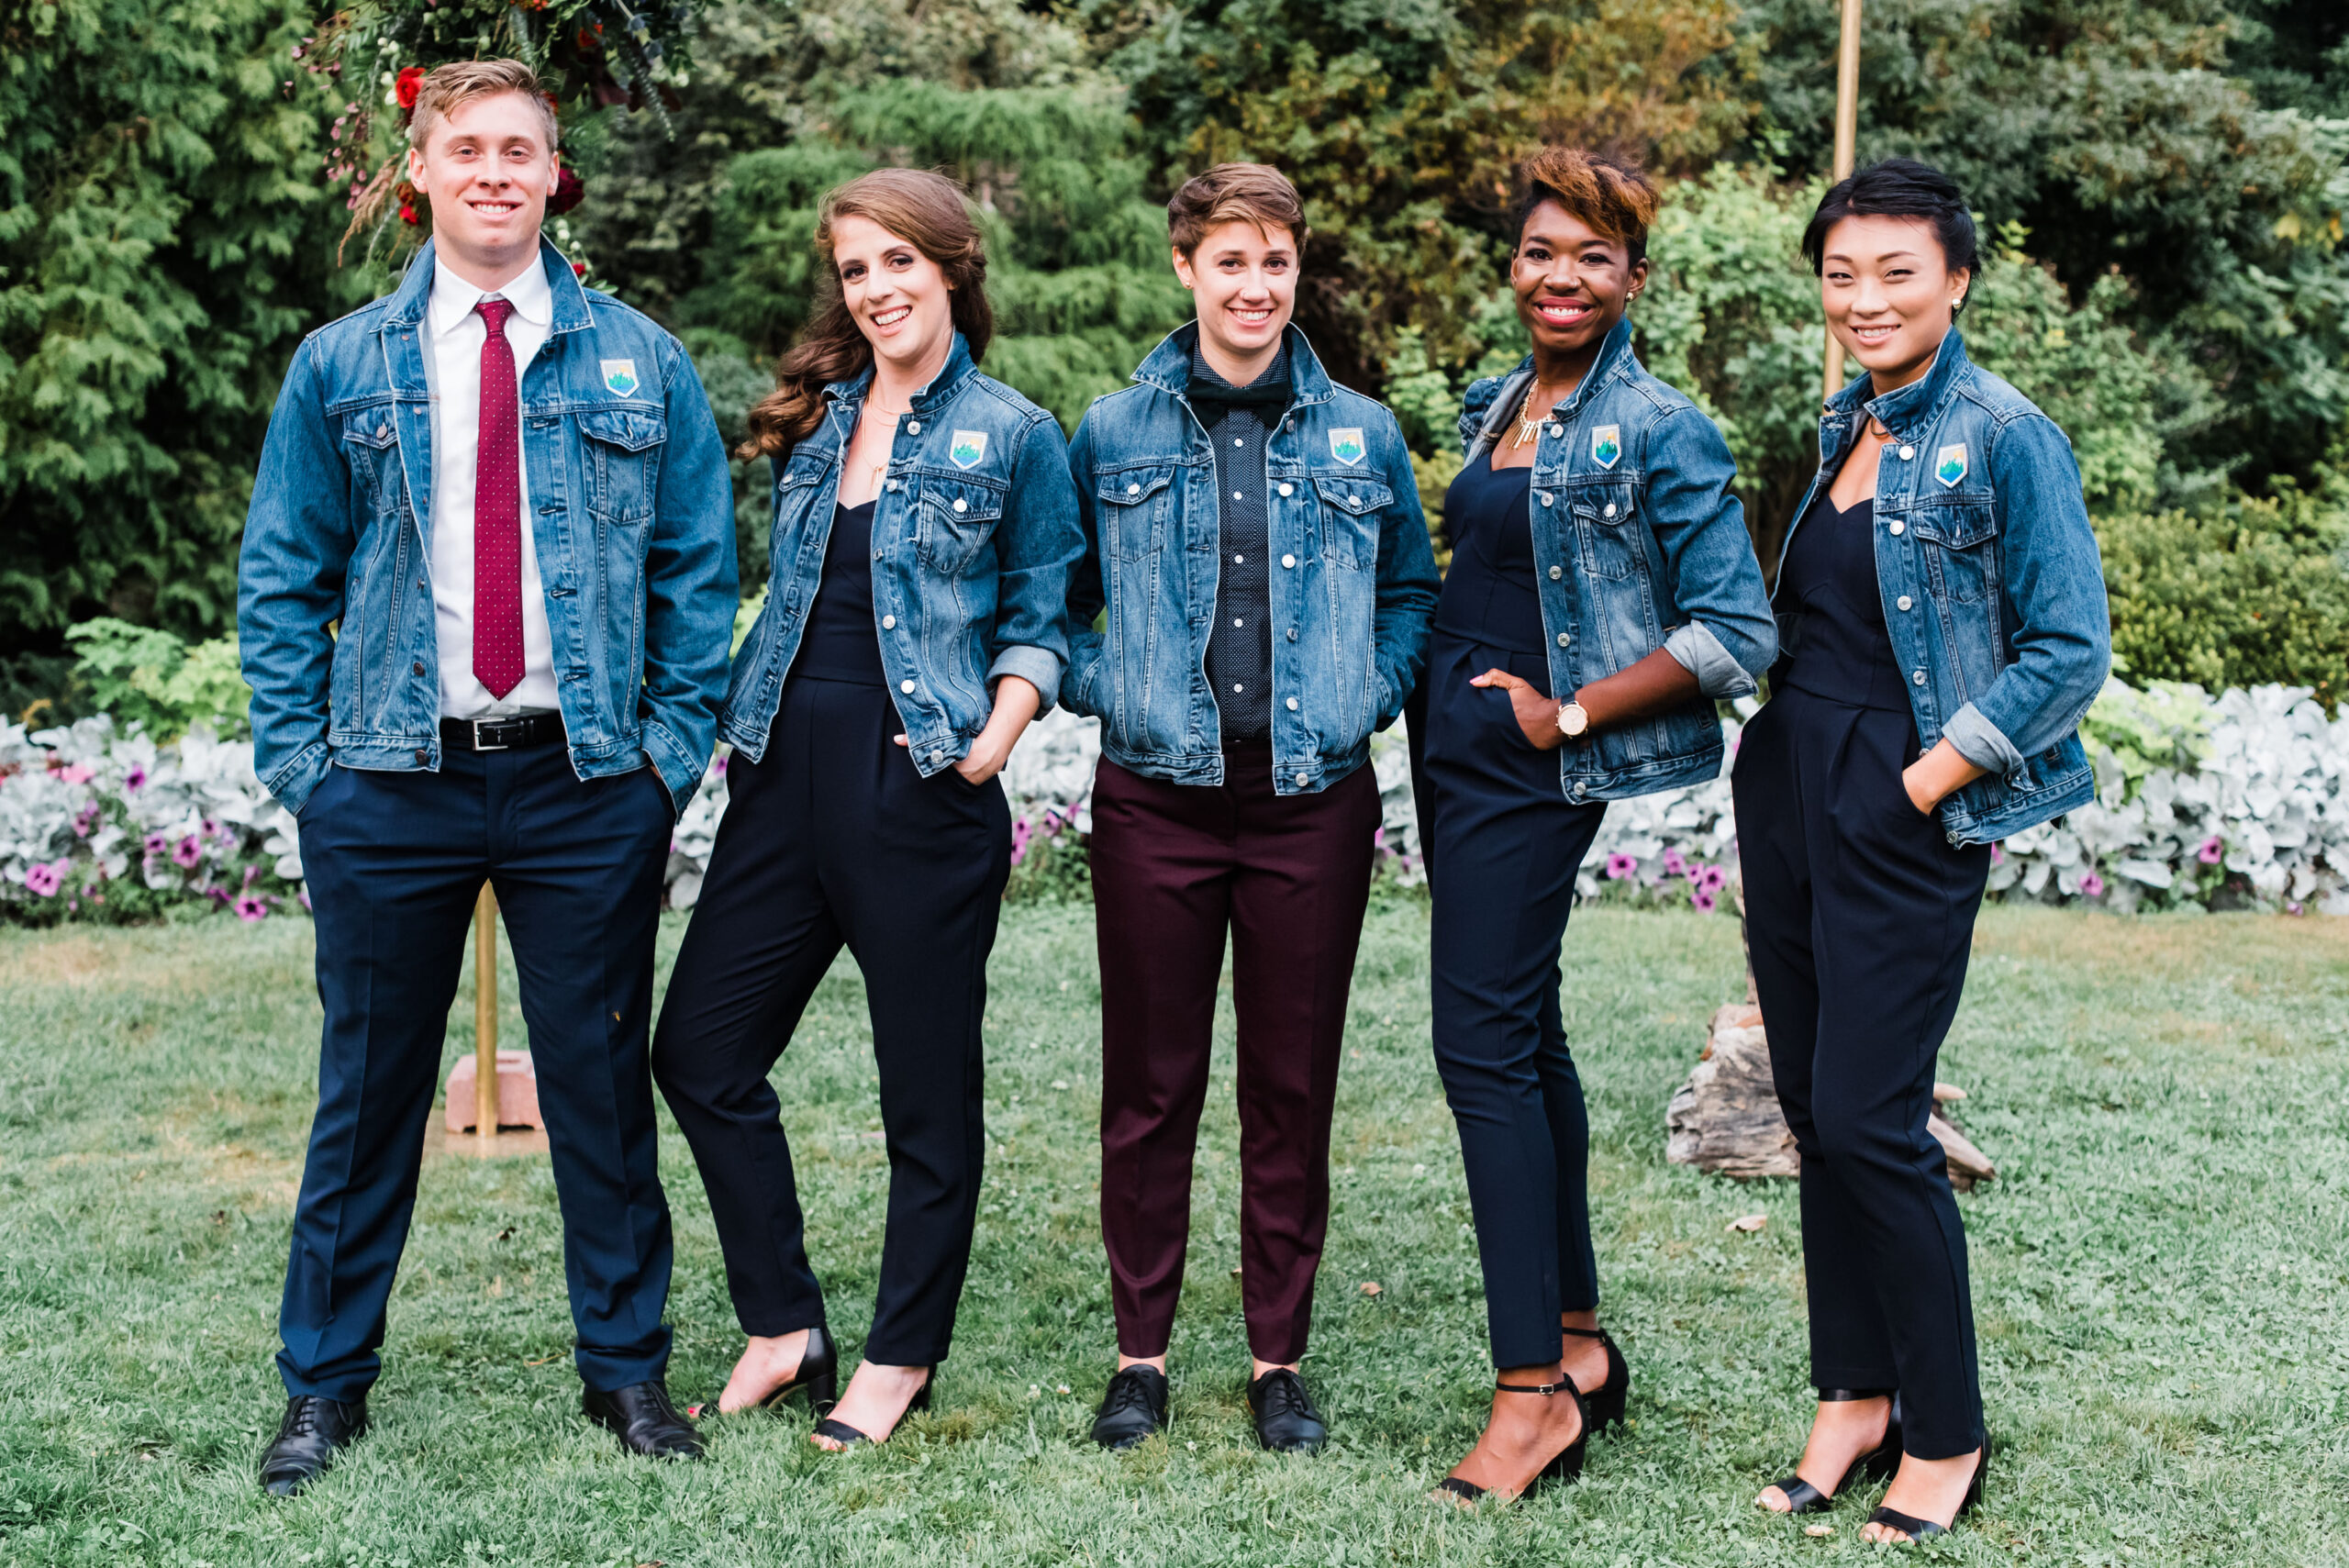 wedding party dressed in denim jackets and jumpsuits